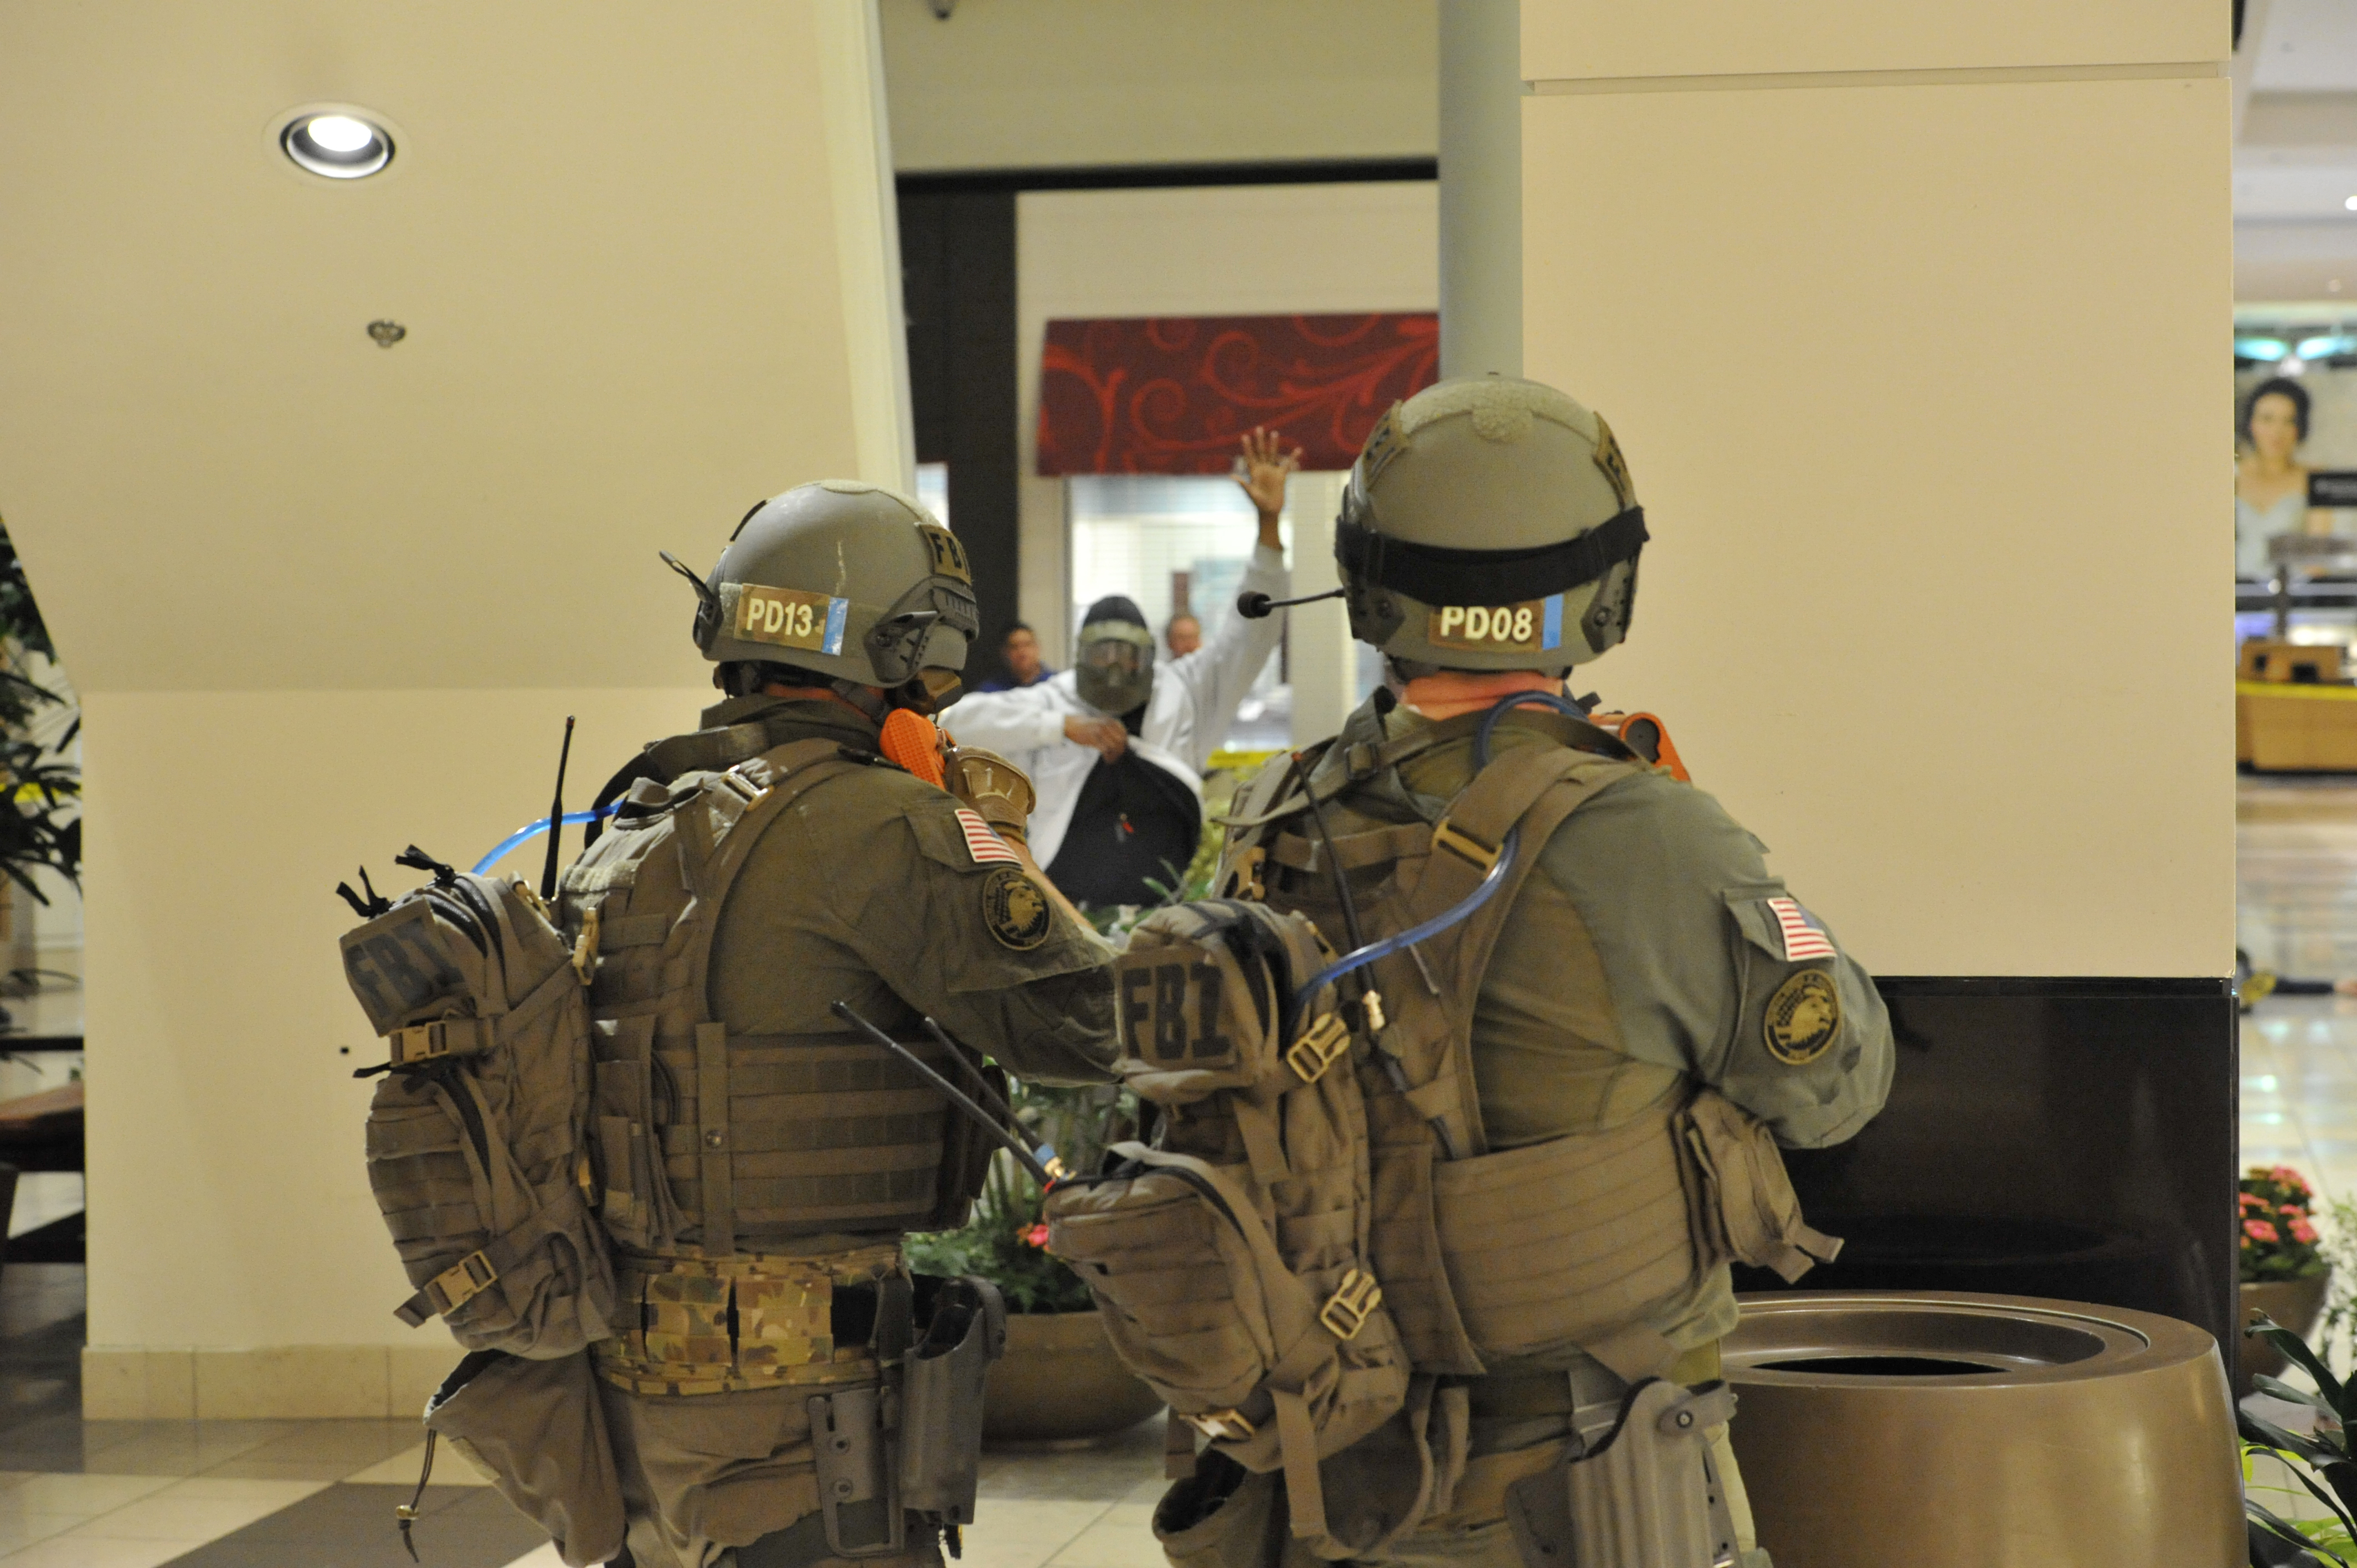 FBI Portland’s SWAT team participates in a threat response exercise held at Washington Square mall.
